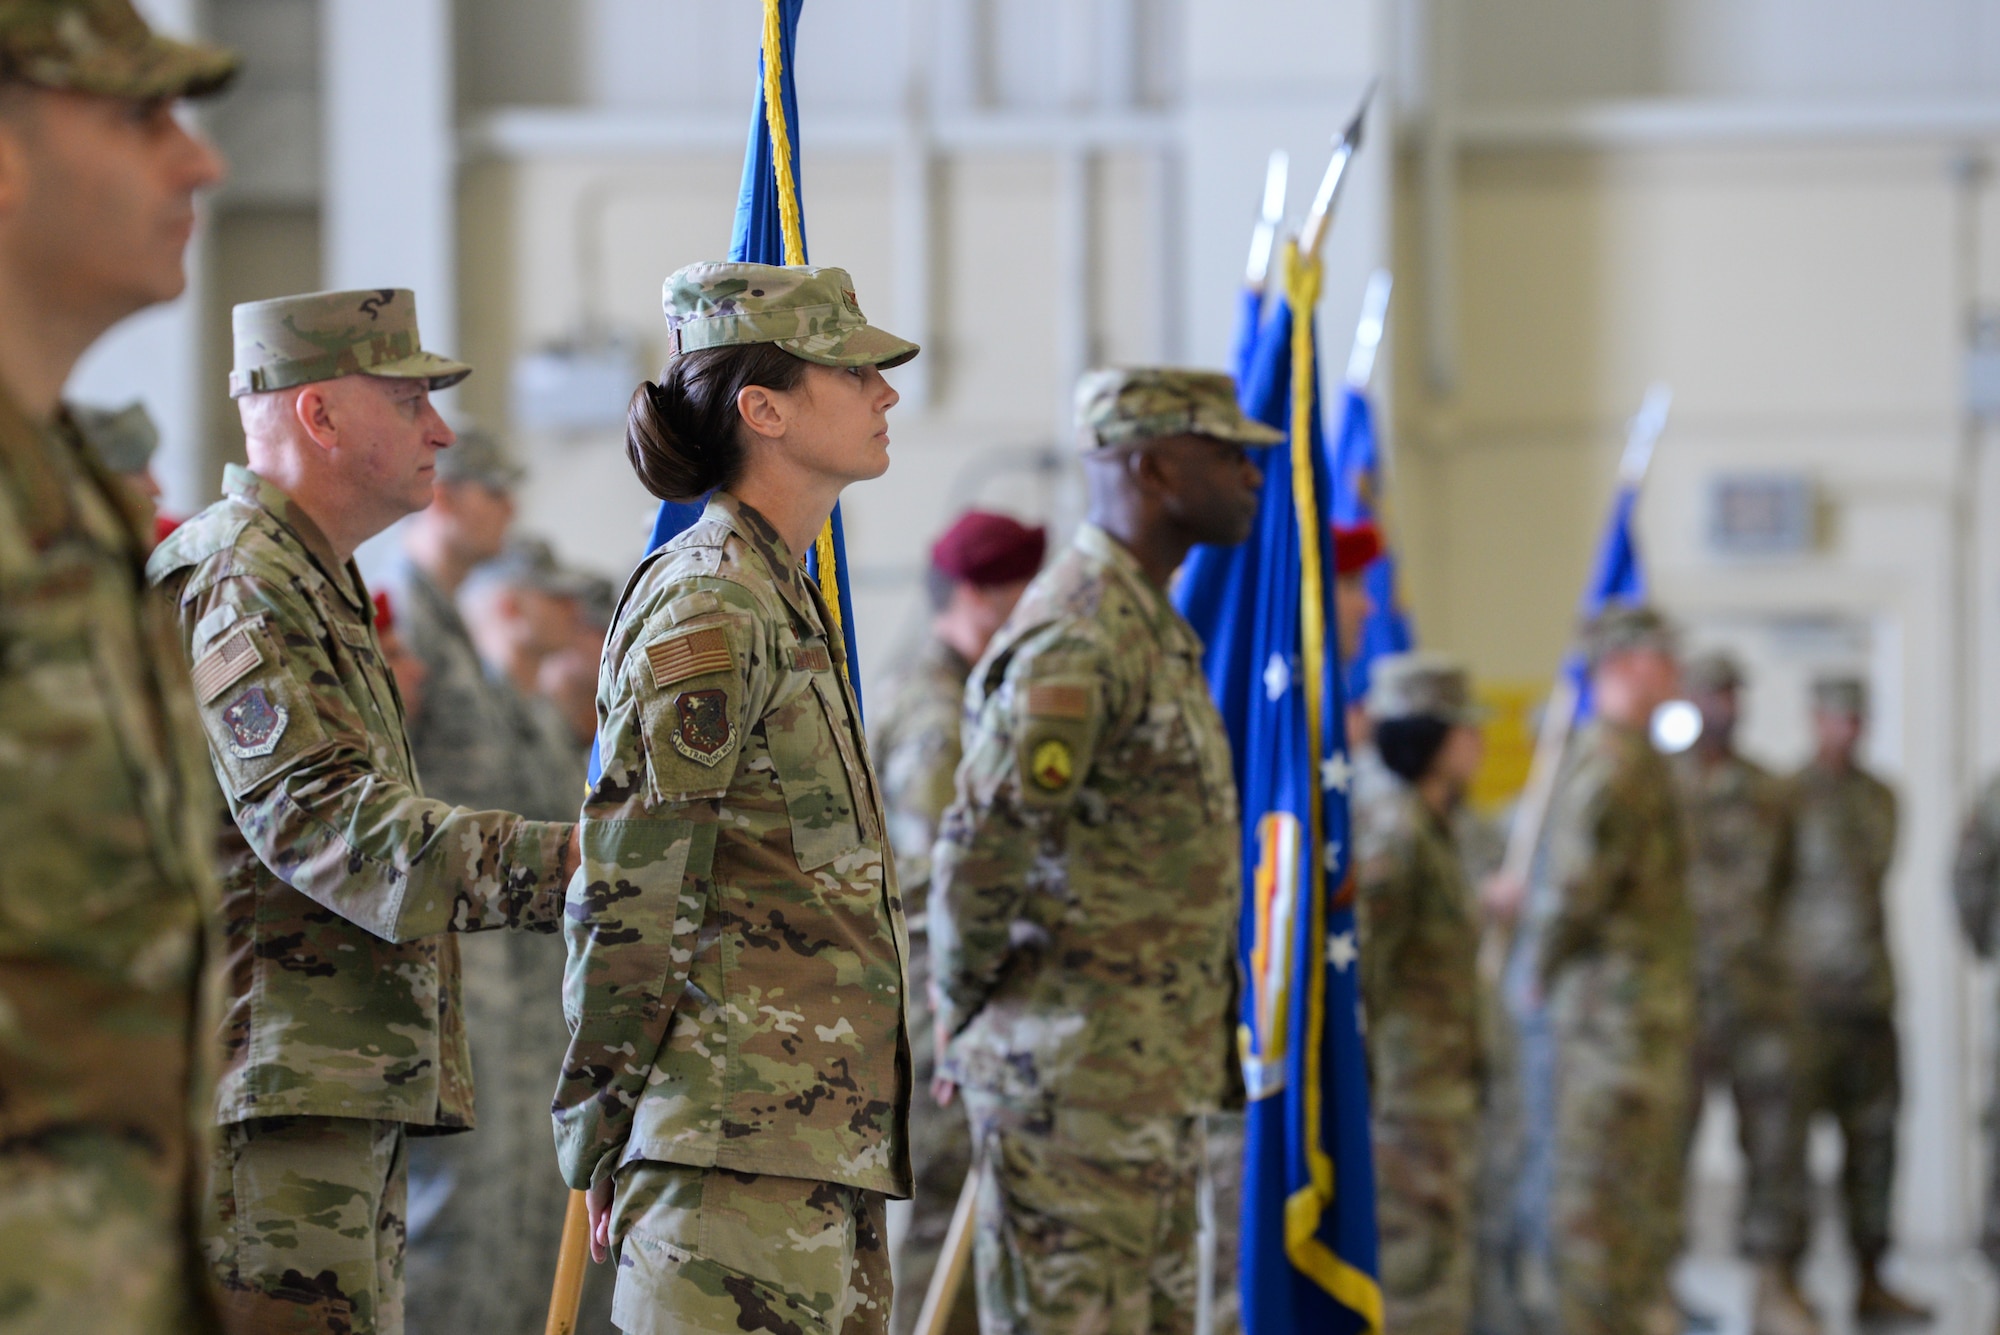 U.S. Air Force Col. Heather Blackwell, 81st Training Wing commander, stands at parade rest during the Second Air Force change of command ceremony on Keesler Air Force Base, Mississippi, Aug. 29, 2019. The ceremony is a symbol of command being exchanged from one commander to the next. Tullos
assumed command of the Second Air Force from Maj. Gen. Timothy Leahy. (U.S. Air Force photo by Airman 1st Class Spencer Tobler)